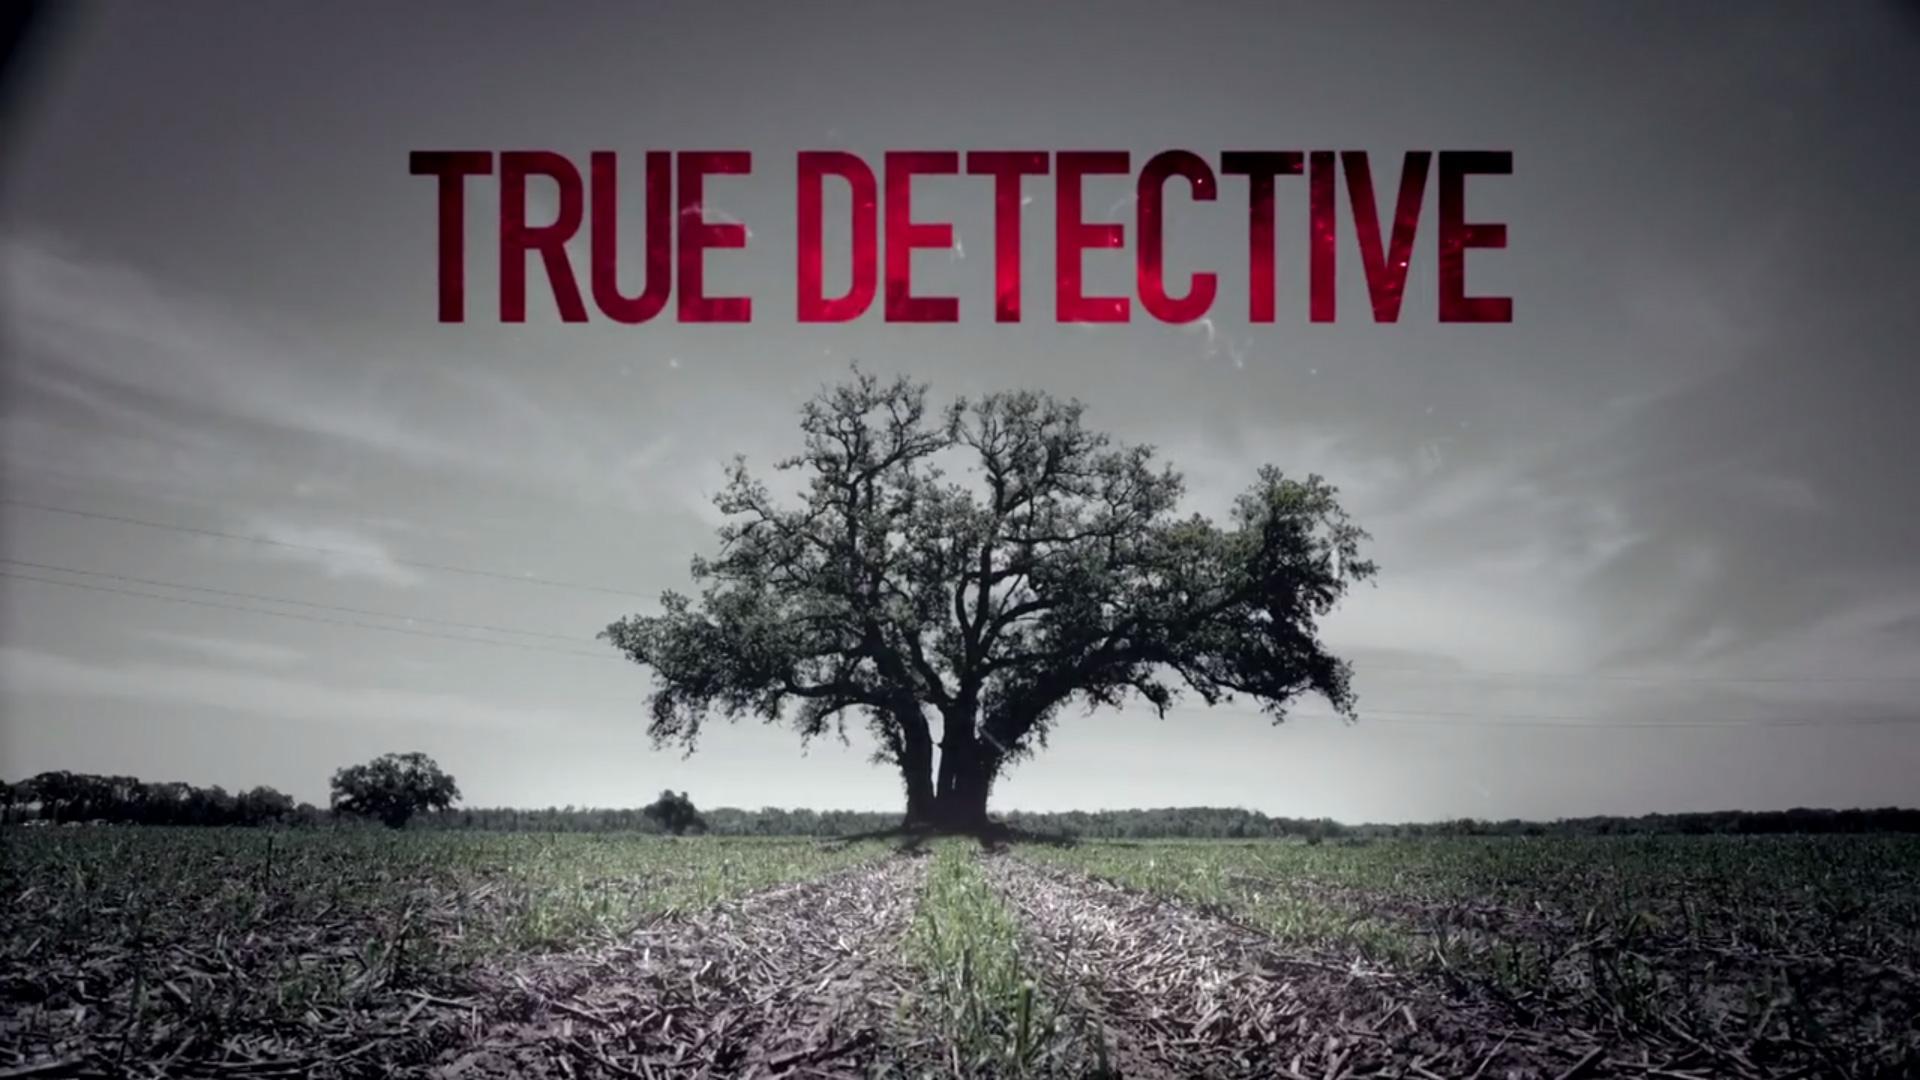 True Detective season 3 release date set for Scoot McNairy